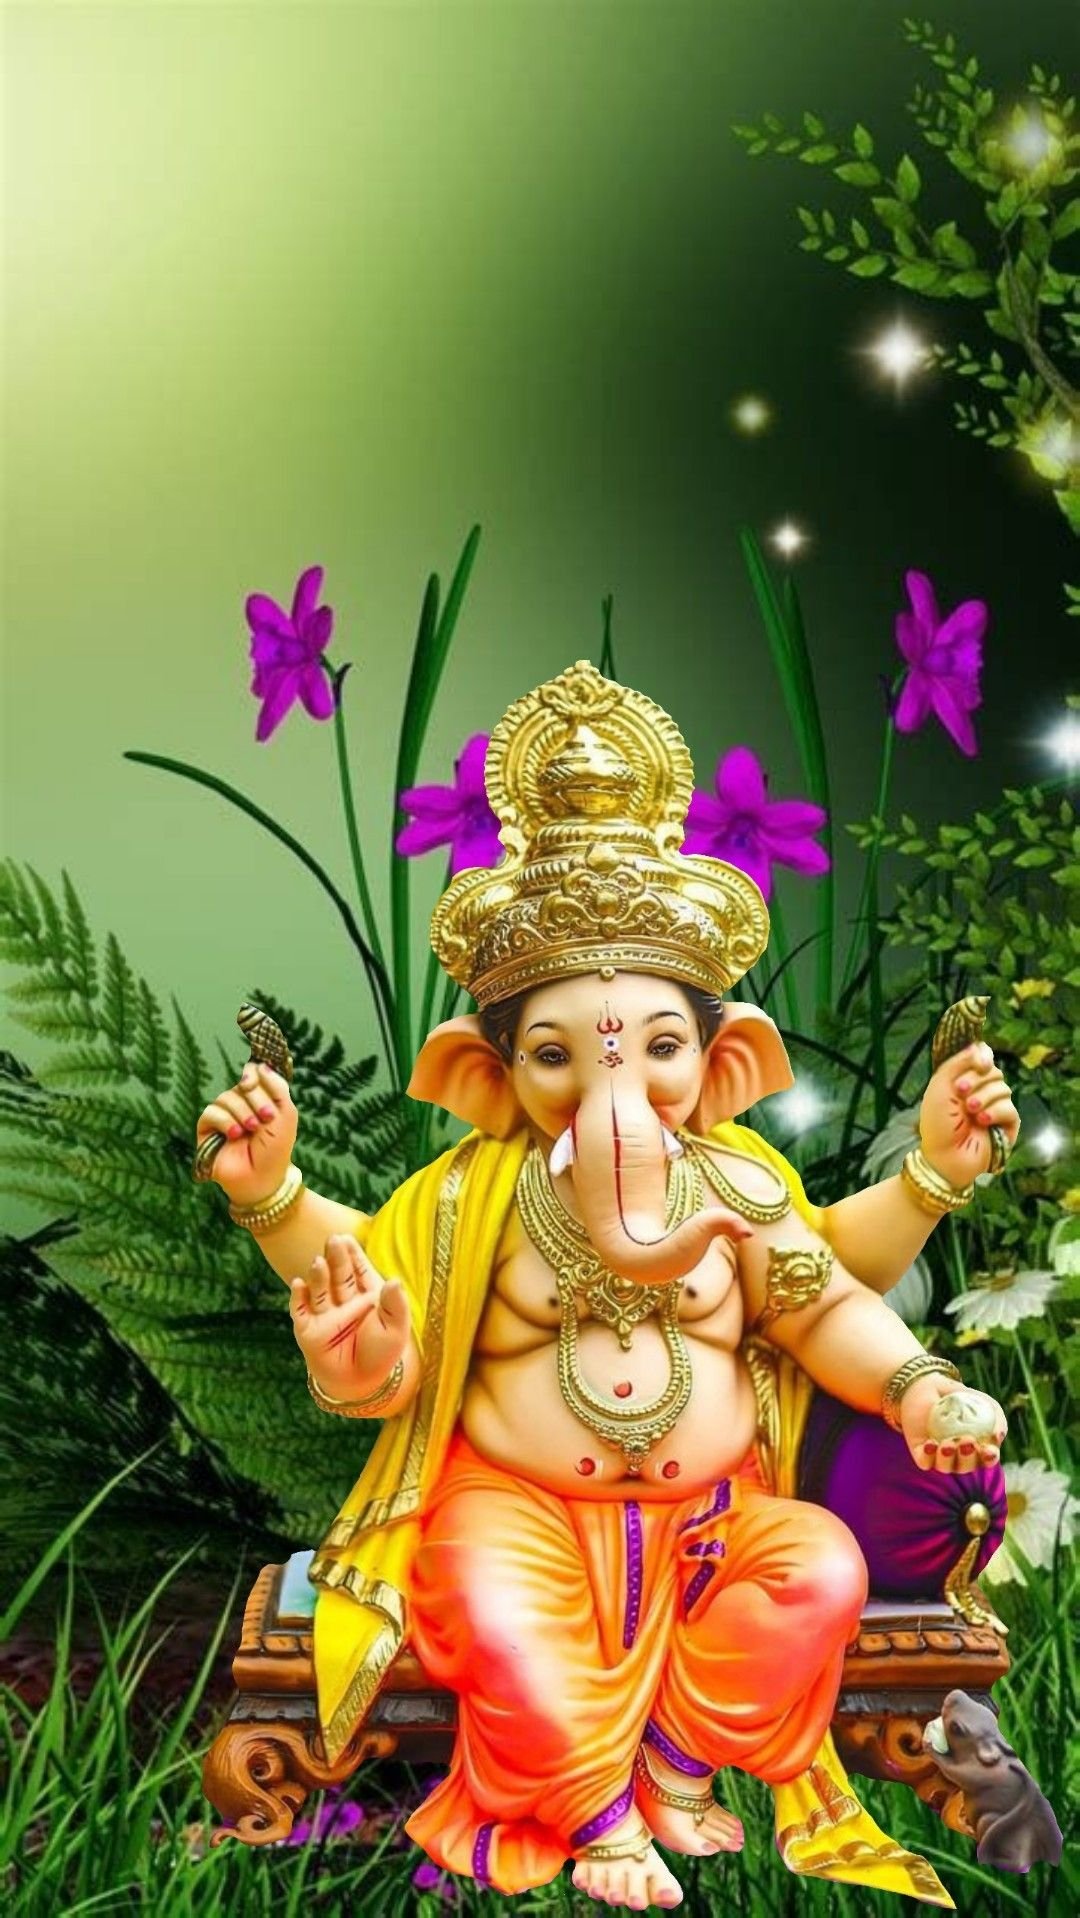 100+] Ganesh Images, Photo, Pictures & Wallpaper (HD)